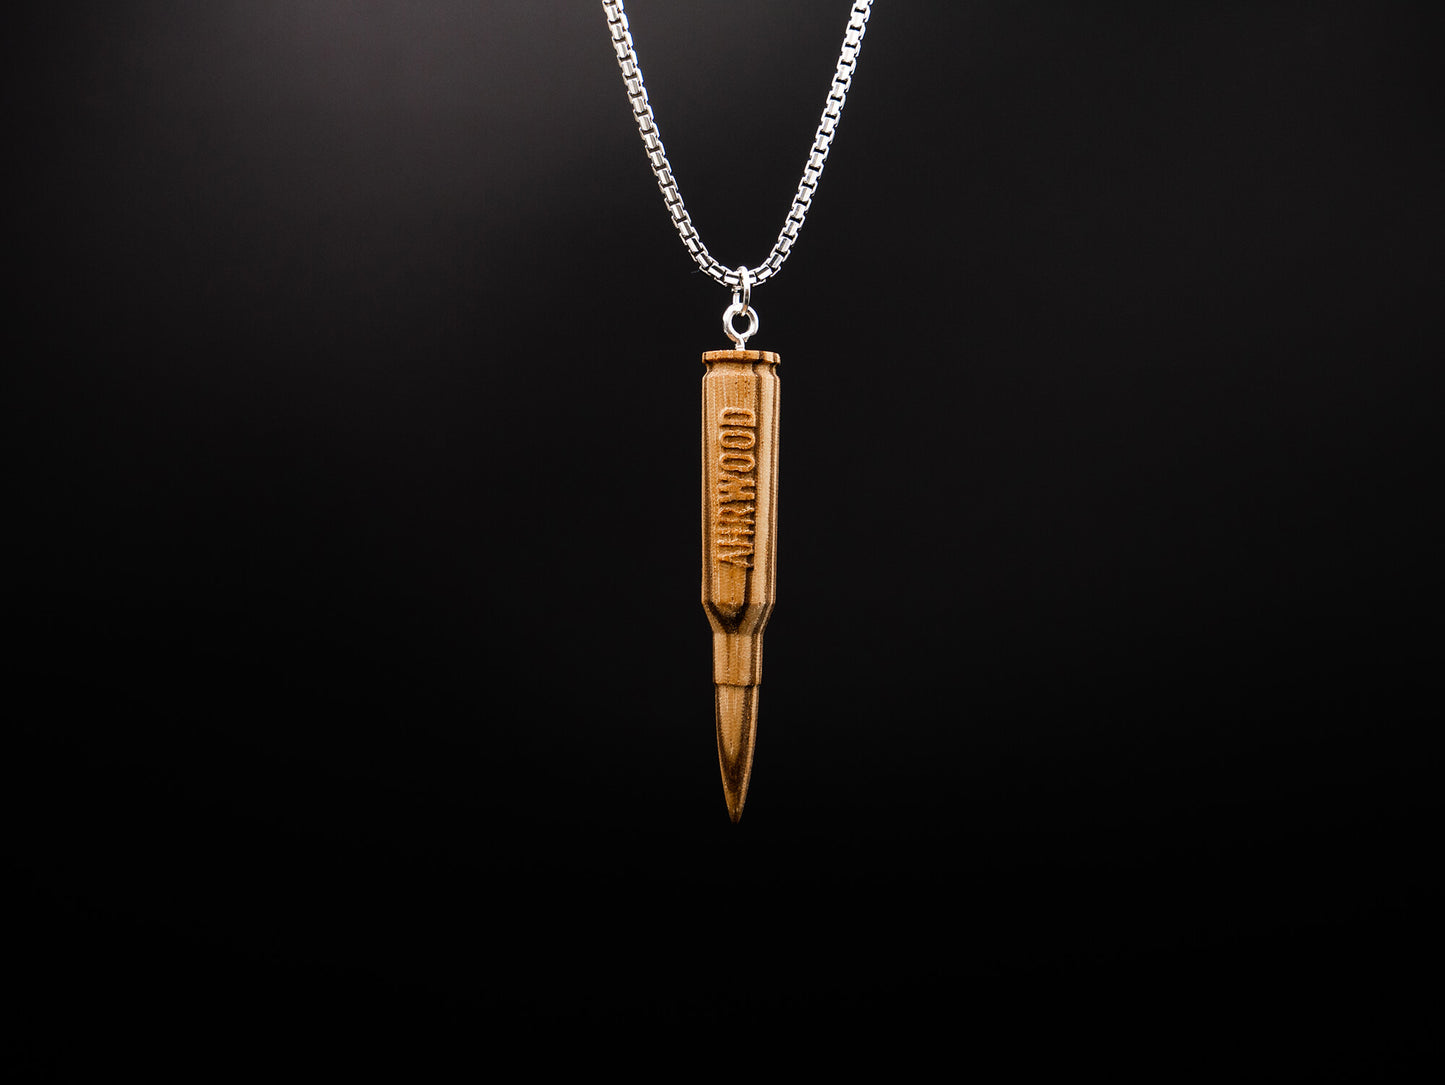 Necklace "AW-47"